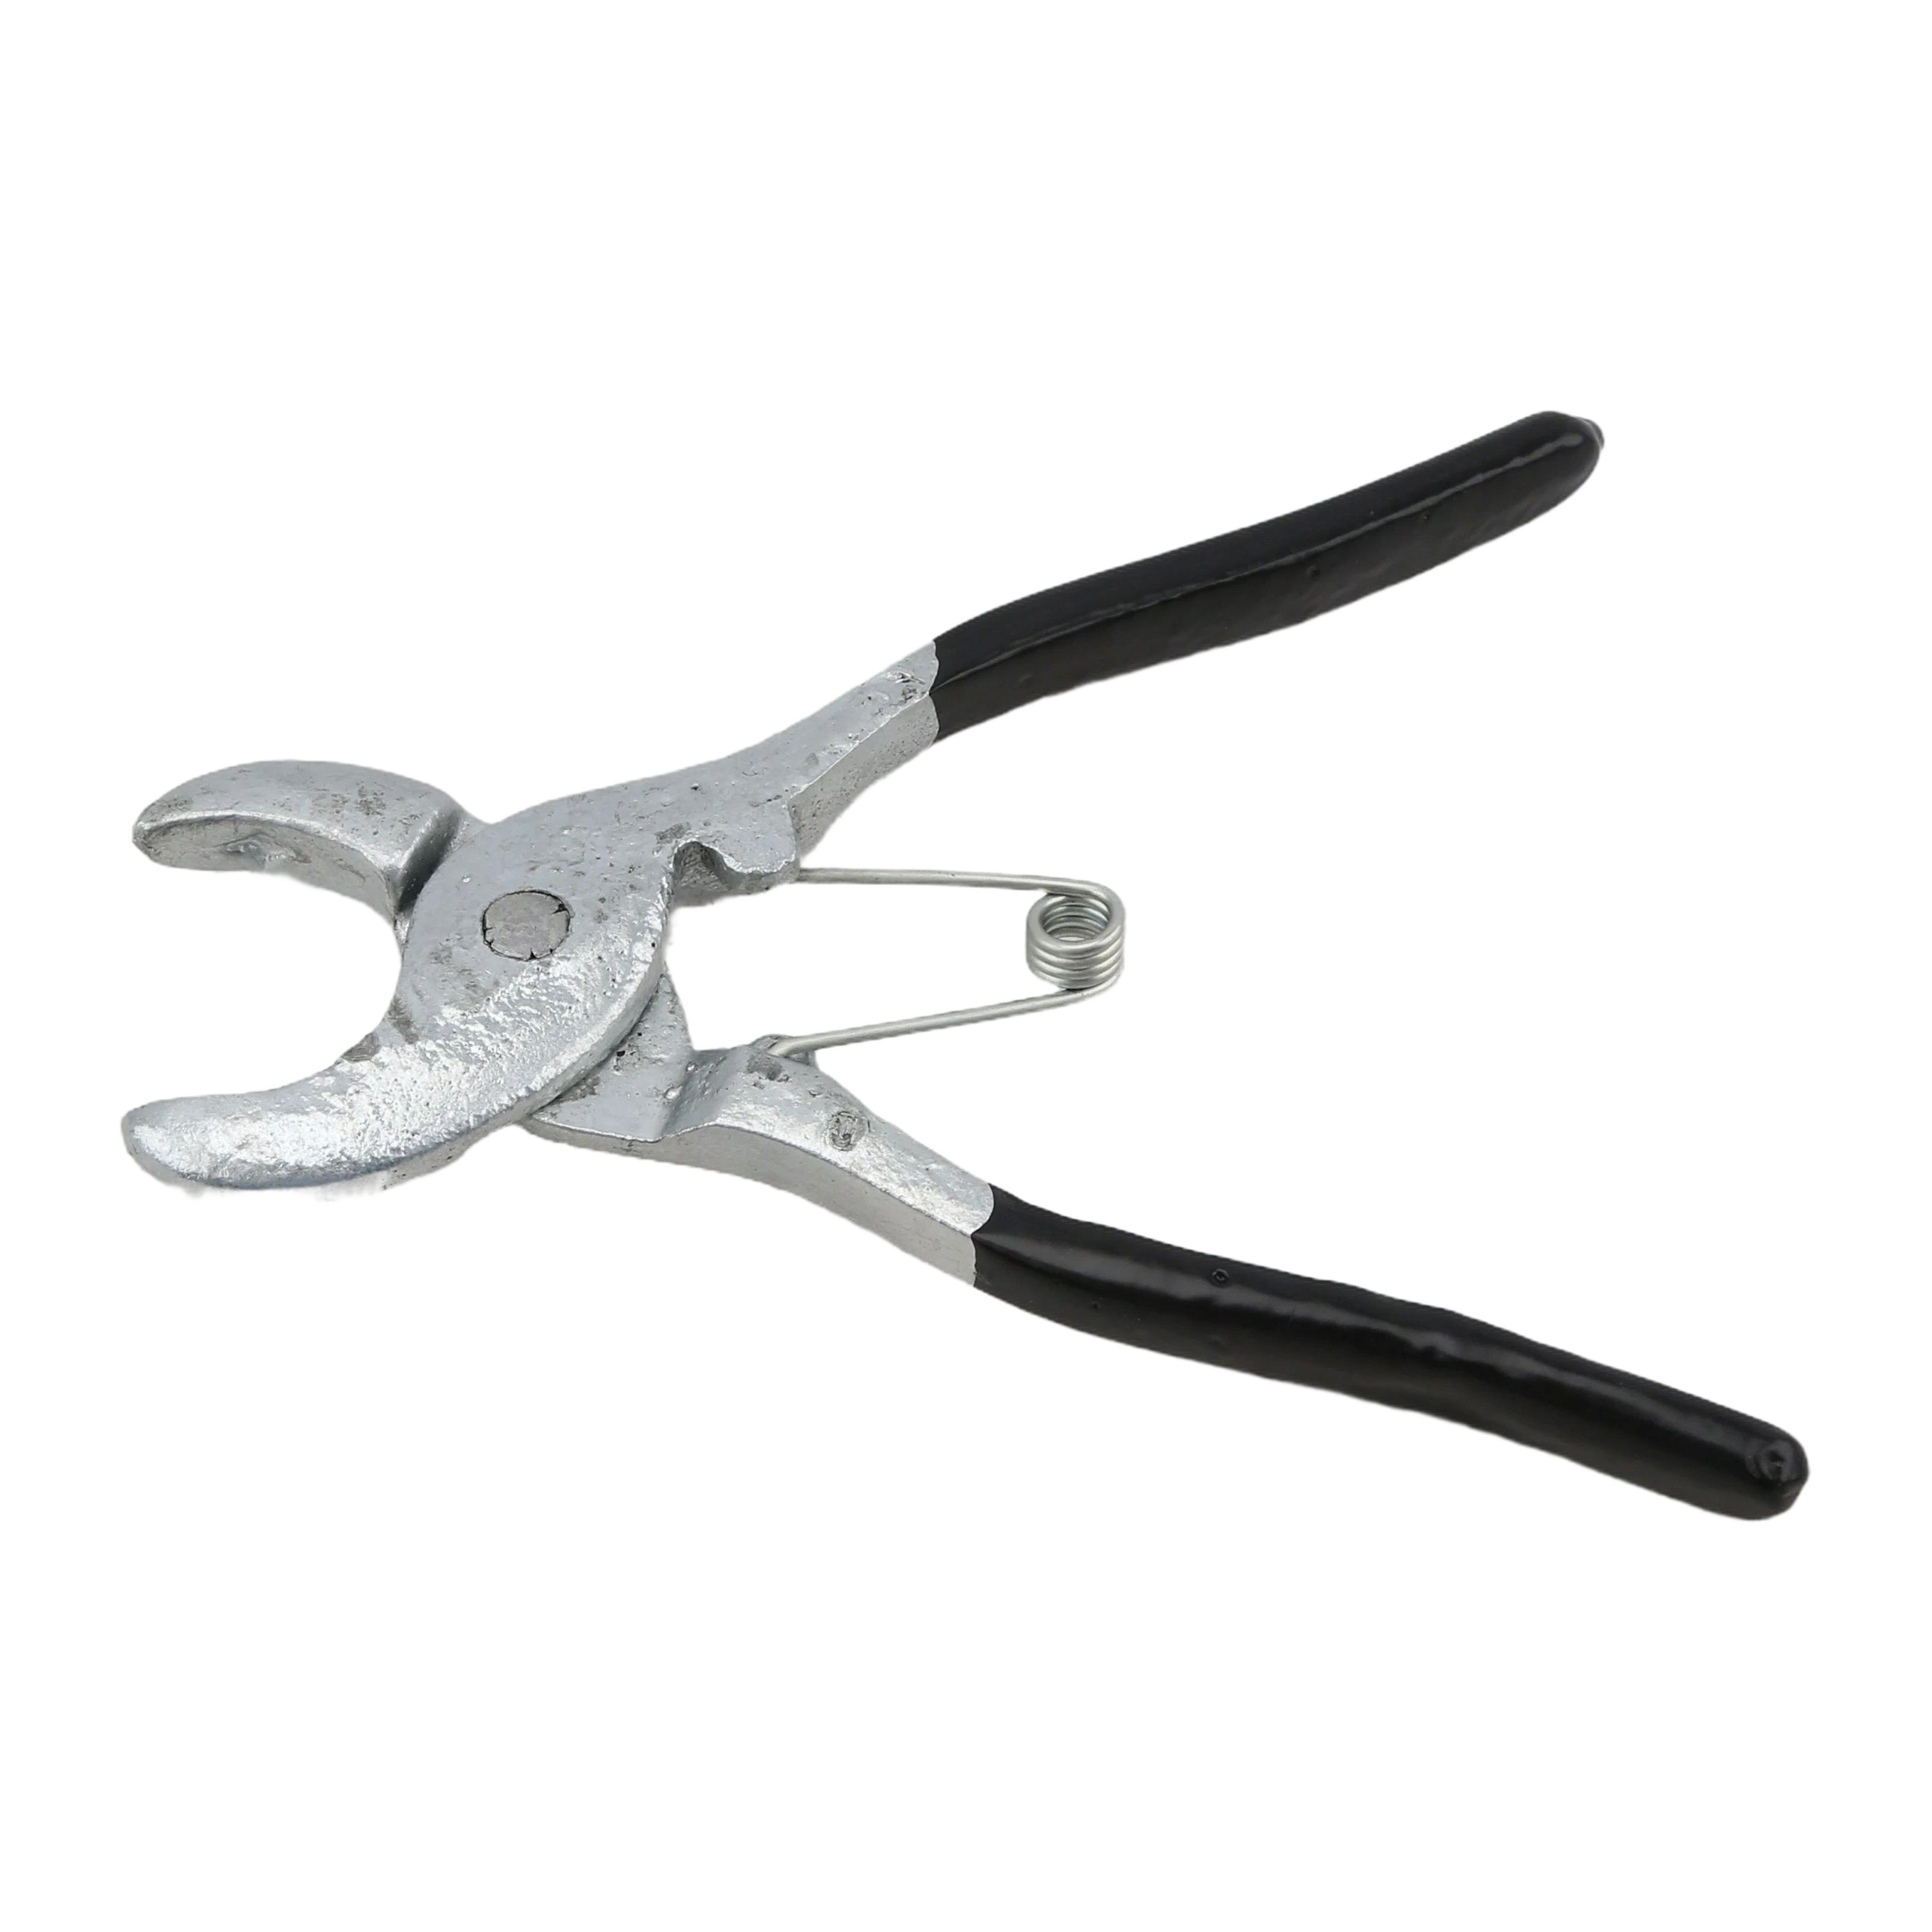 8 Spring Assist Hog Ring Pliers - Fence Tool (Malleable Iron) - Chain Link  Fence Tools